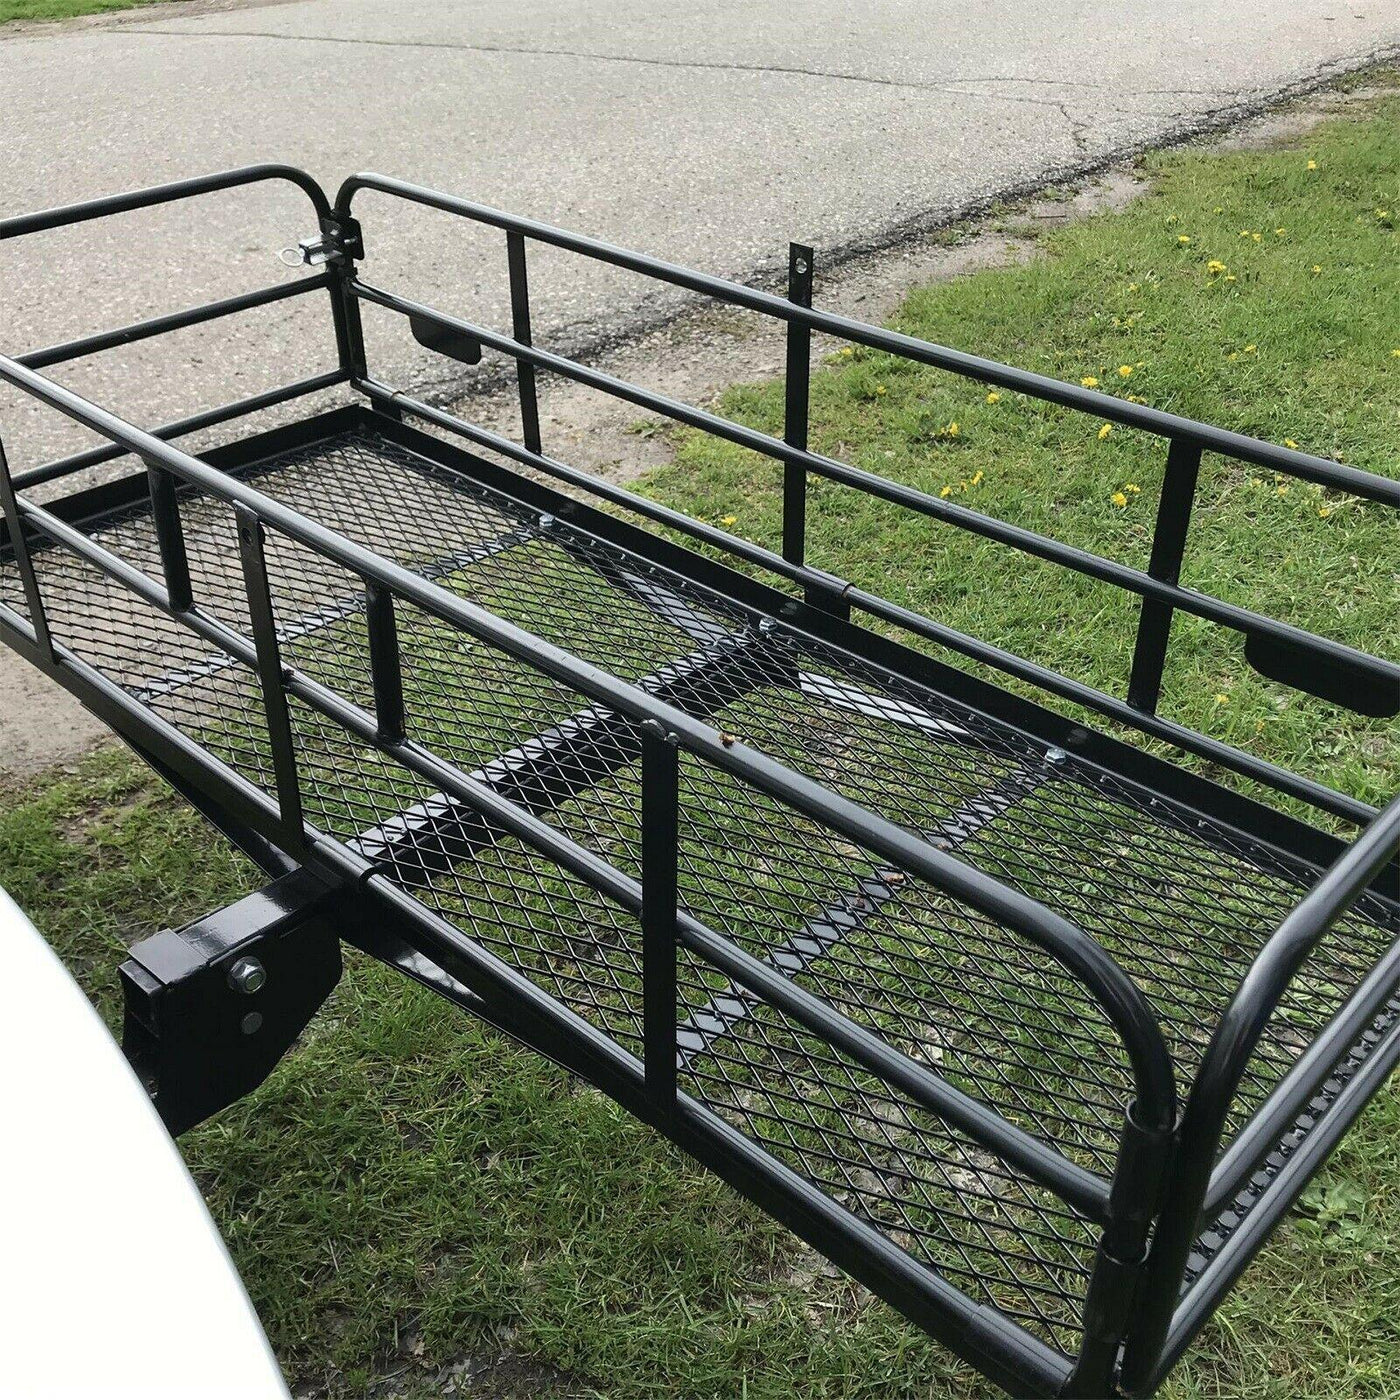 Foldable Hitch Cargo Carrier Rack 60"x 24"x 14" Basket Trailer 500 lbs Capacity - Moto Life Products